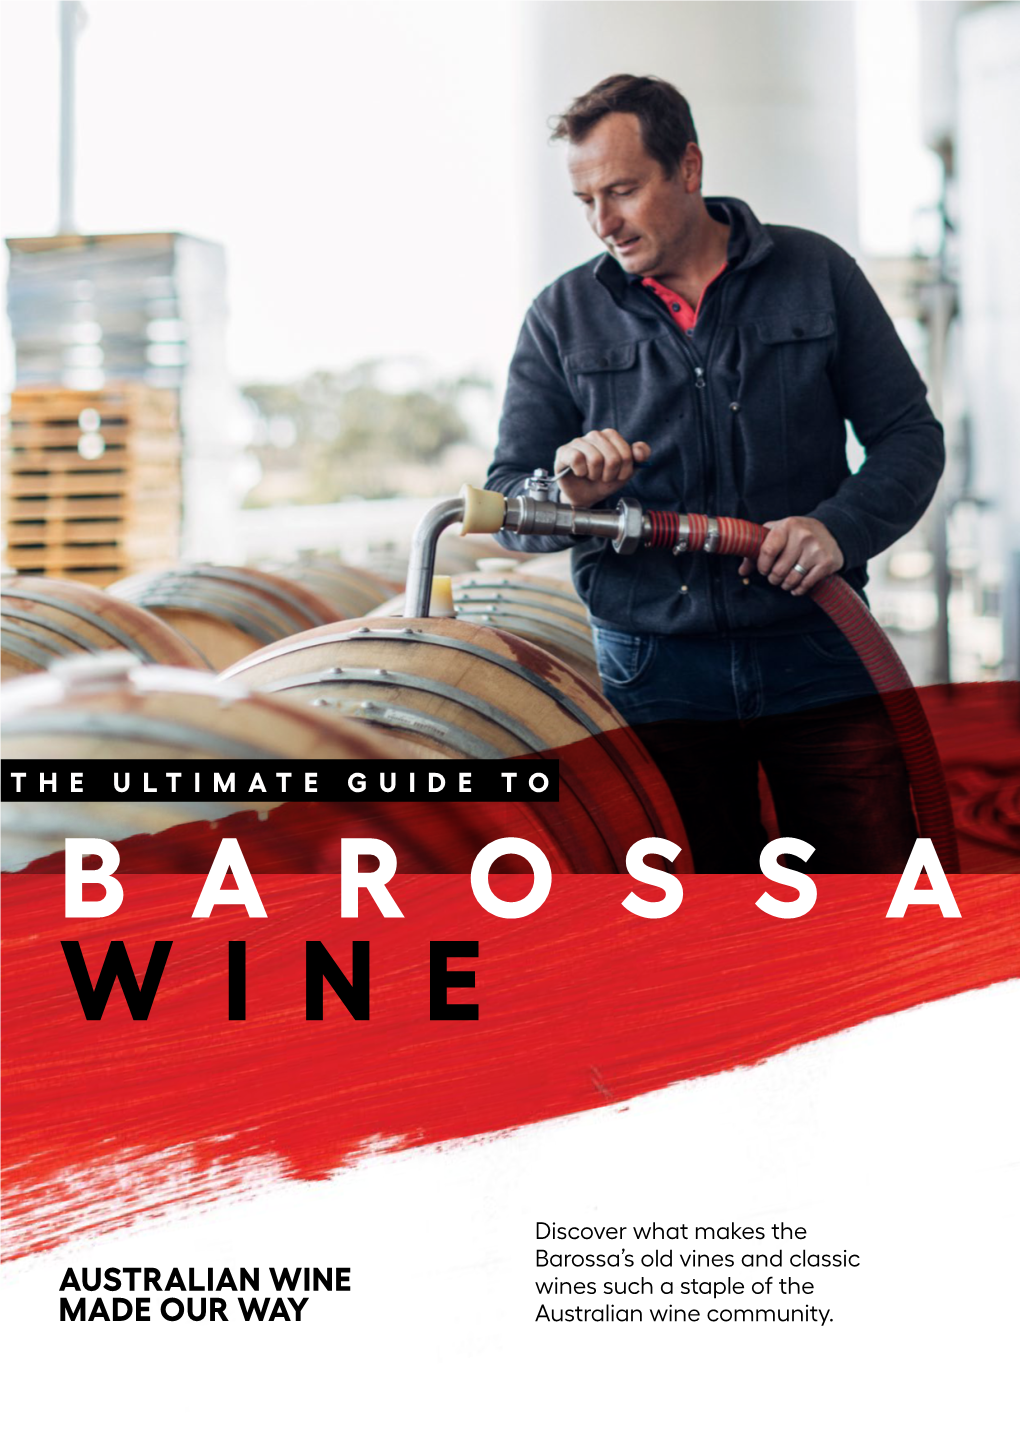 The Ultimate Guide to Barossa Wine